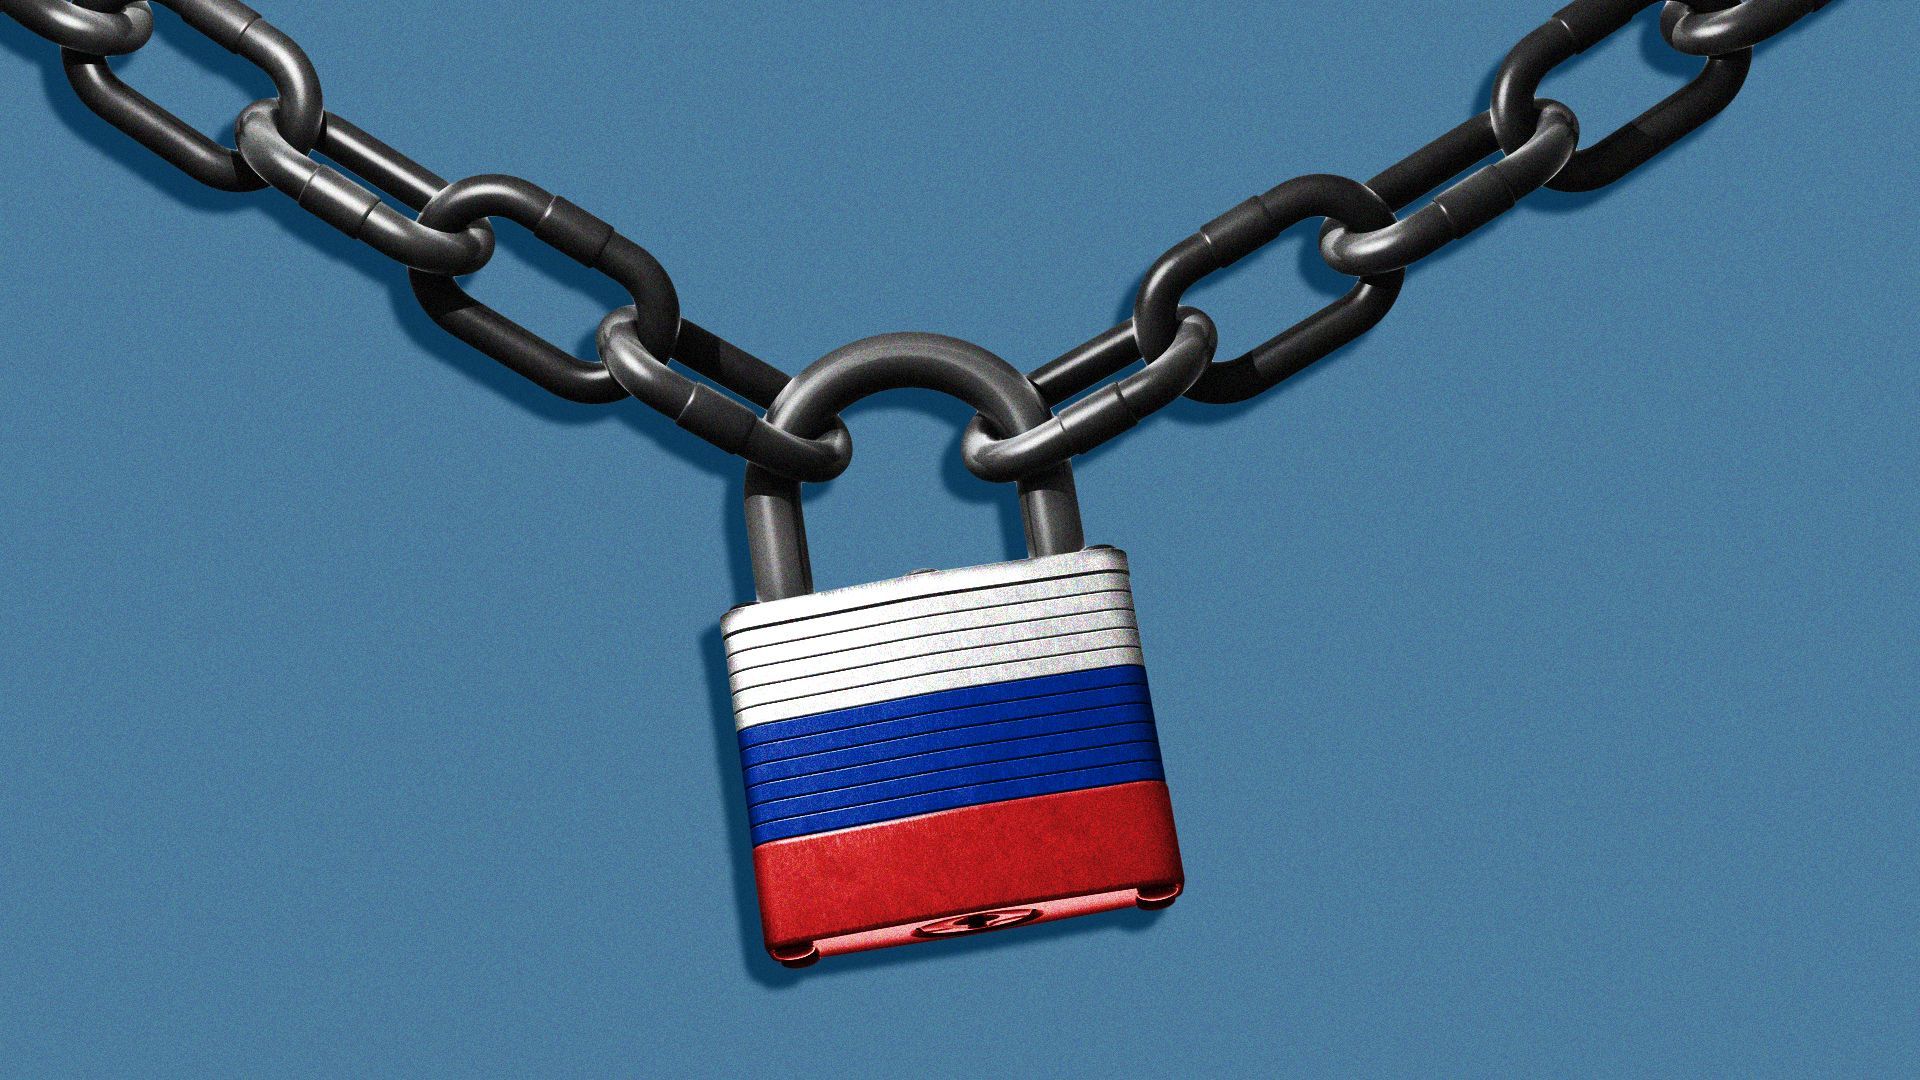 Illustration of a lock in the colors of the Russian flag.